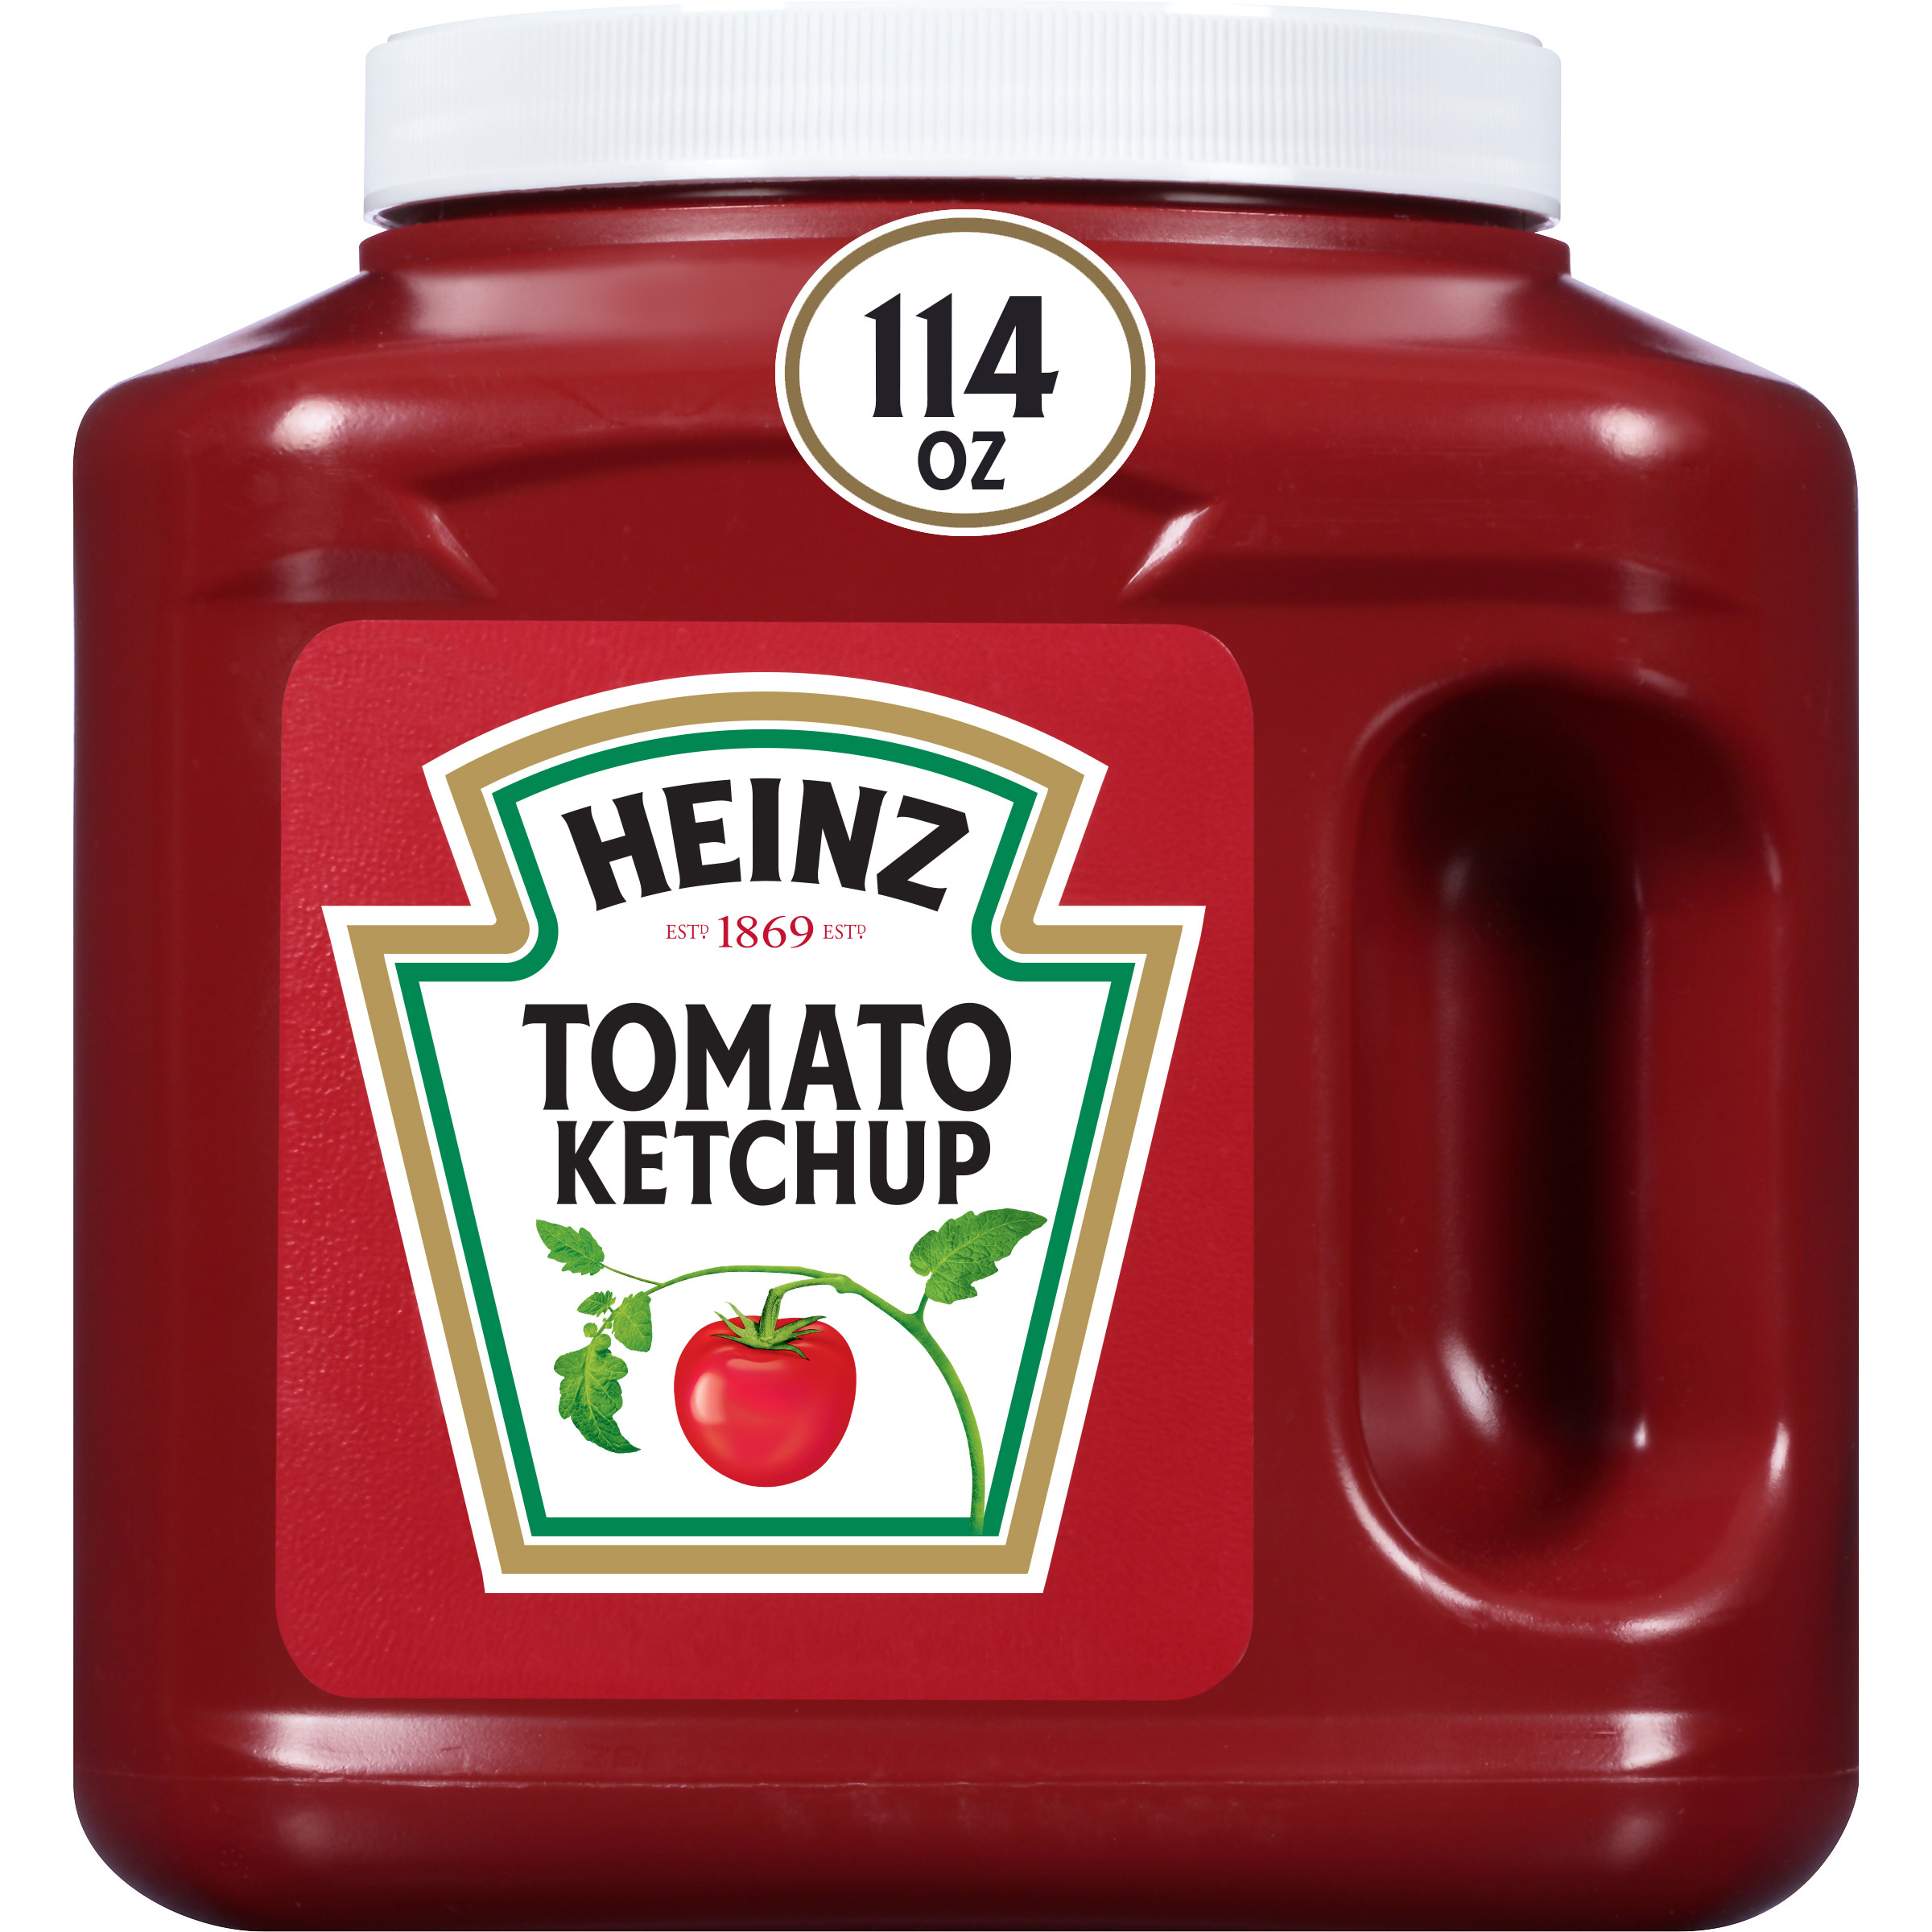 Detail Picture Of Ketchup Nomer 6